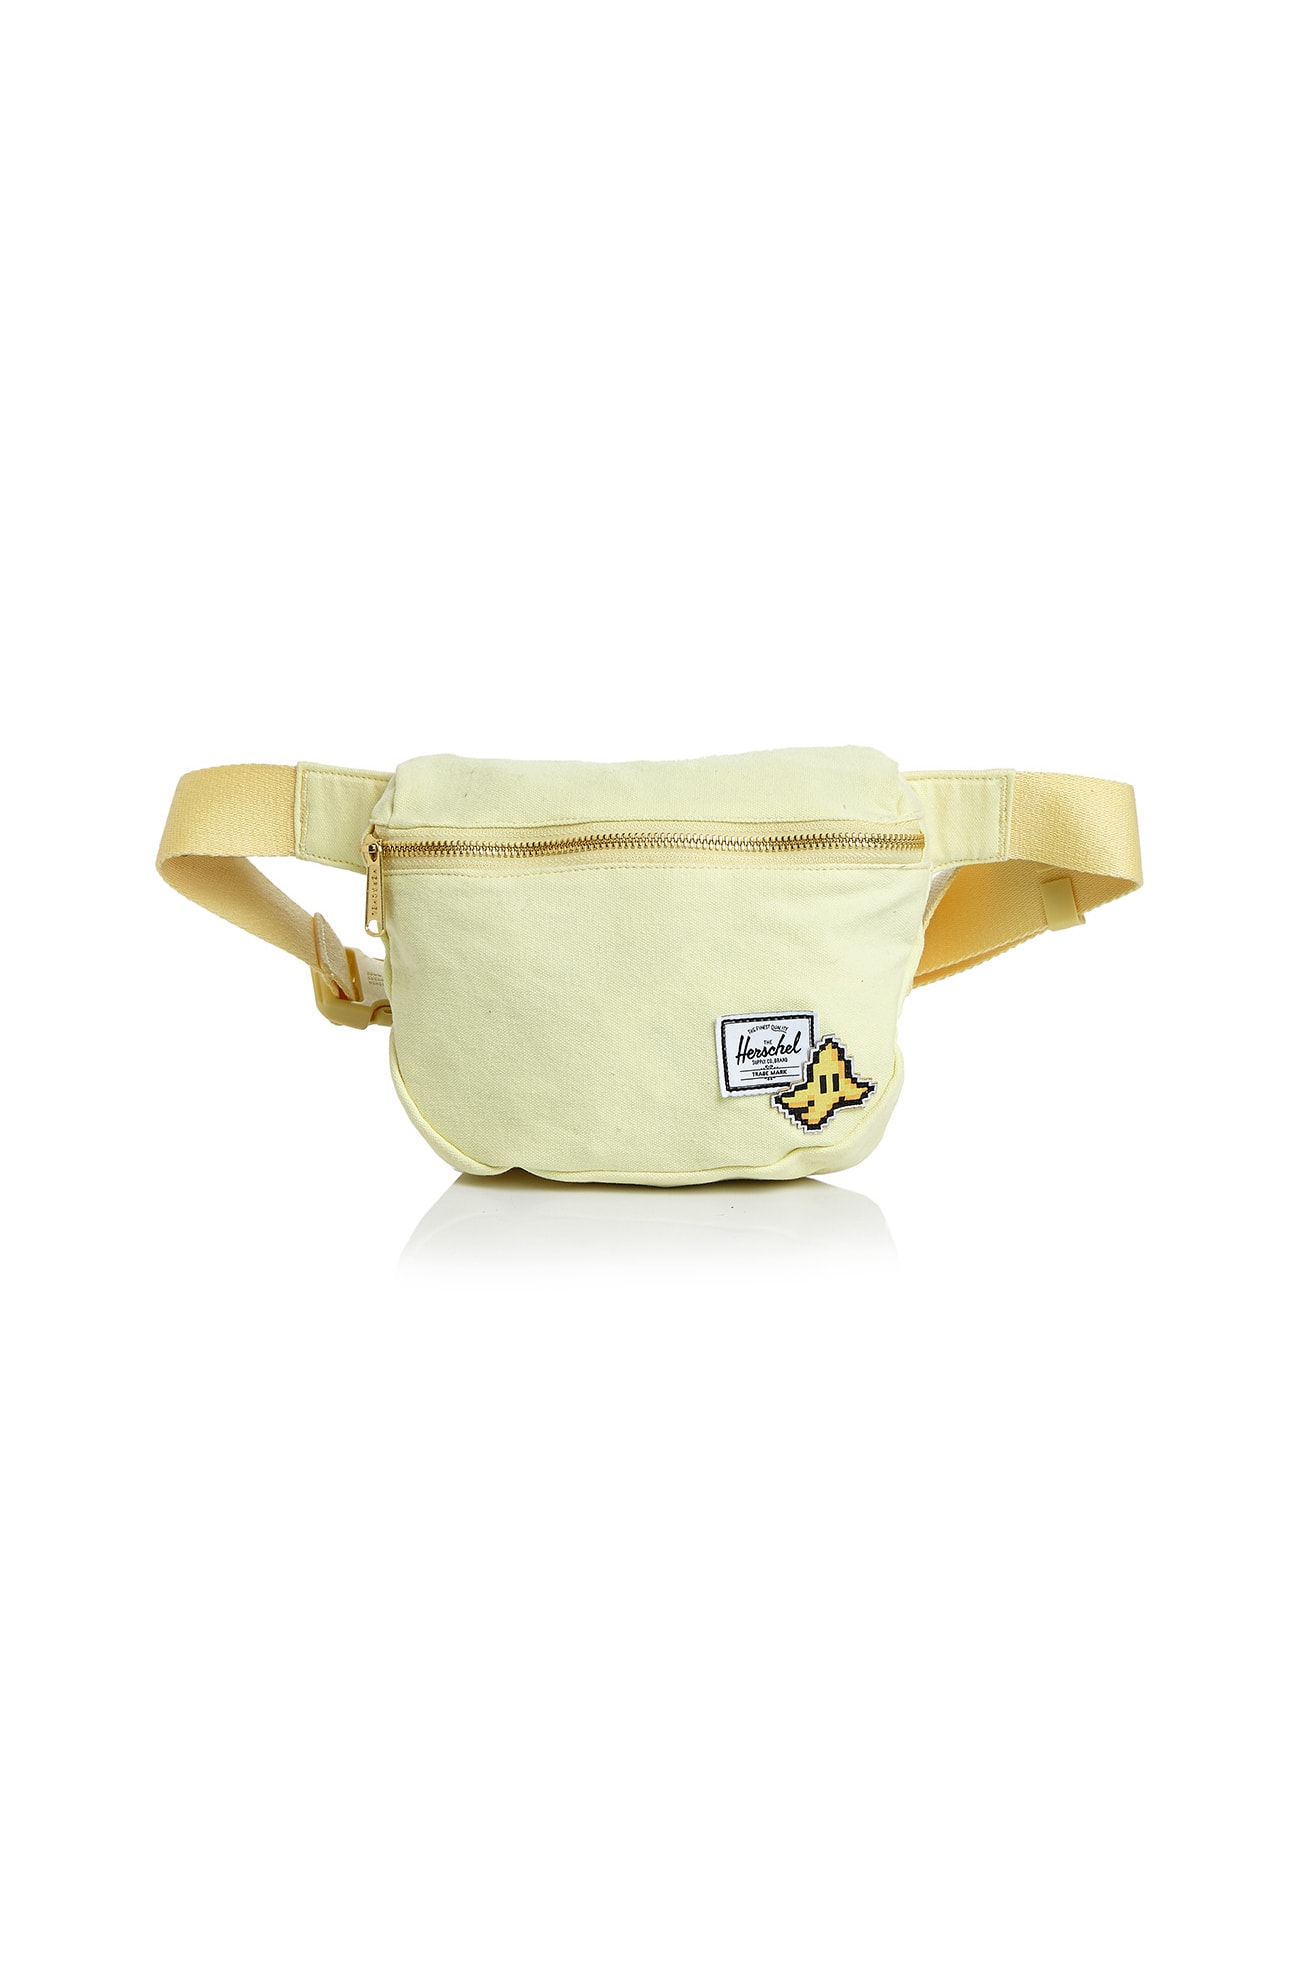 Bloomingdale's x Nintendo National Gamer Day Capsule Collection Herschel Supply Fanny Pack Yellow